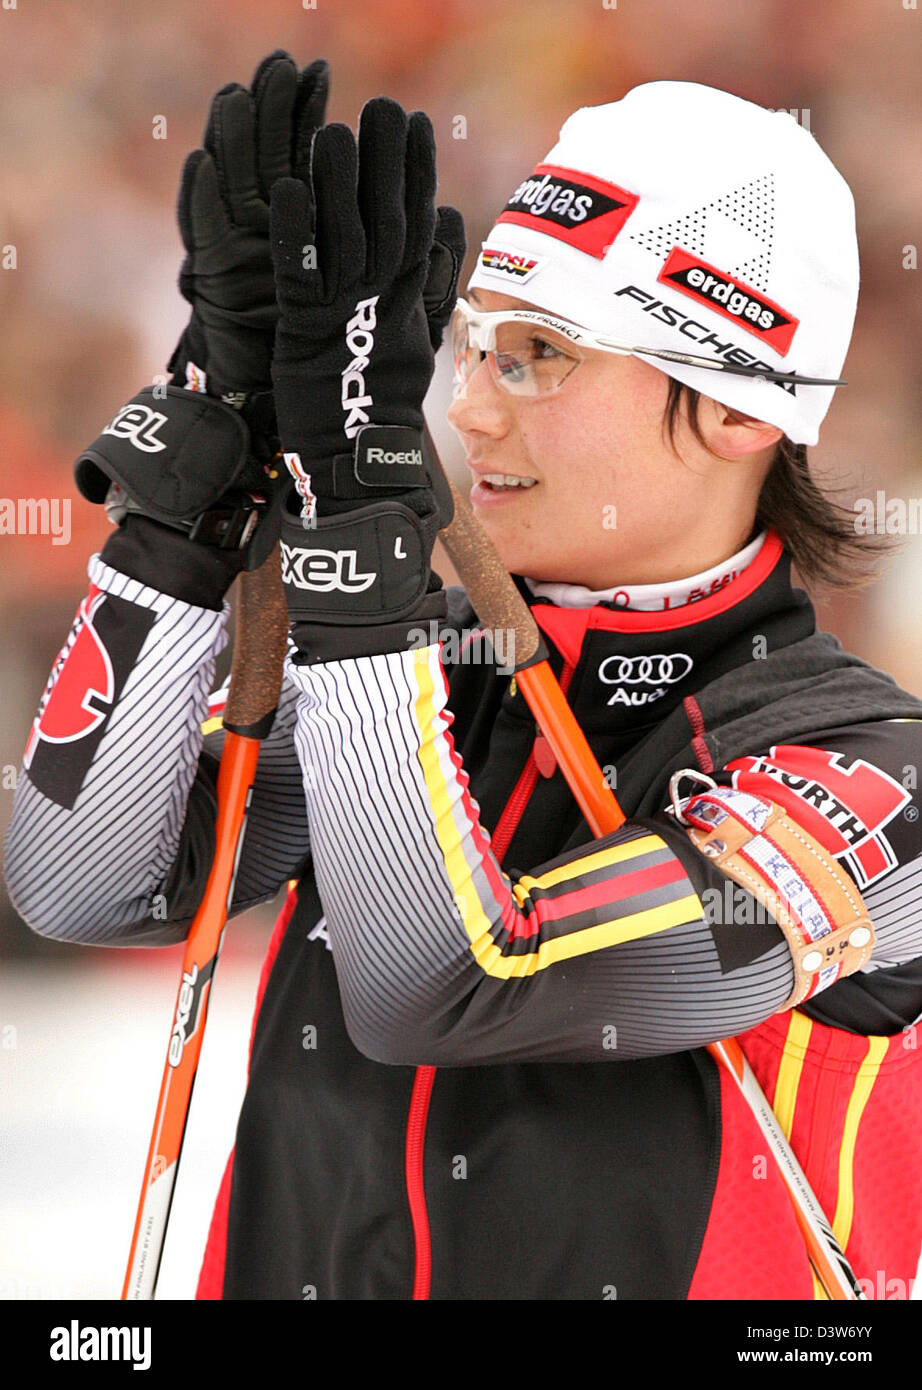 German Simone Denkinger smiles prior to the Biathlon World Cup women's 6k relay event in Ruhpolding, Germany, Wednesday, 10 January 2007. Russia produced the finest shooting performance of the season to win the fourth World Cup women's relay of the campaign in Ruhpolding ahead of the German team. Photo: Andreas Gebert Stock Photo